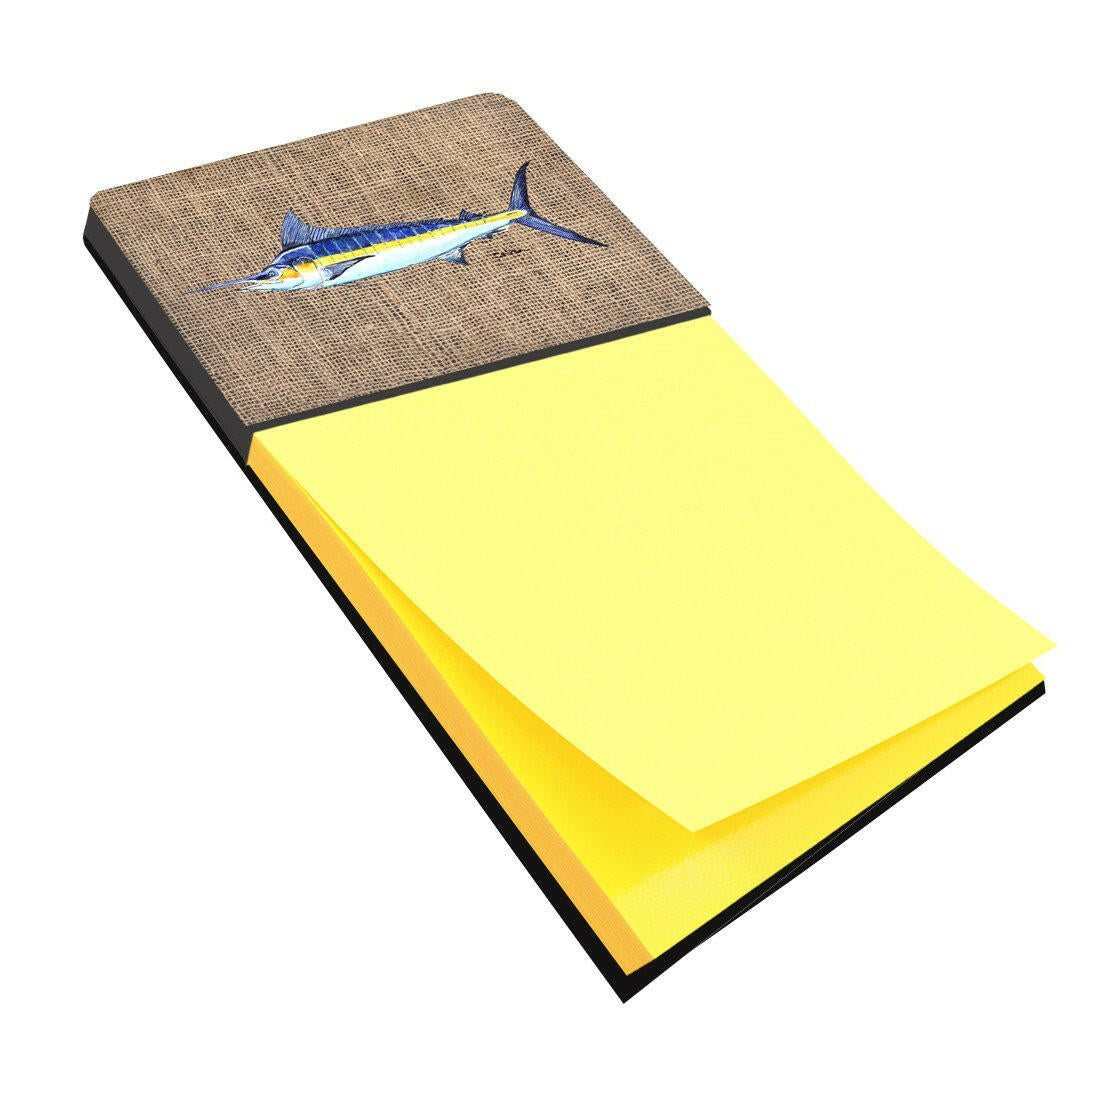 Fish - Marlin Refiillable Sticky Note Holder or Postit Note Dispenser 8773SN by Caroline's Treasures